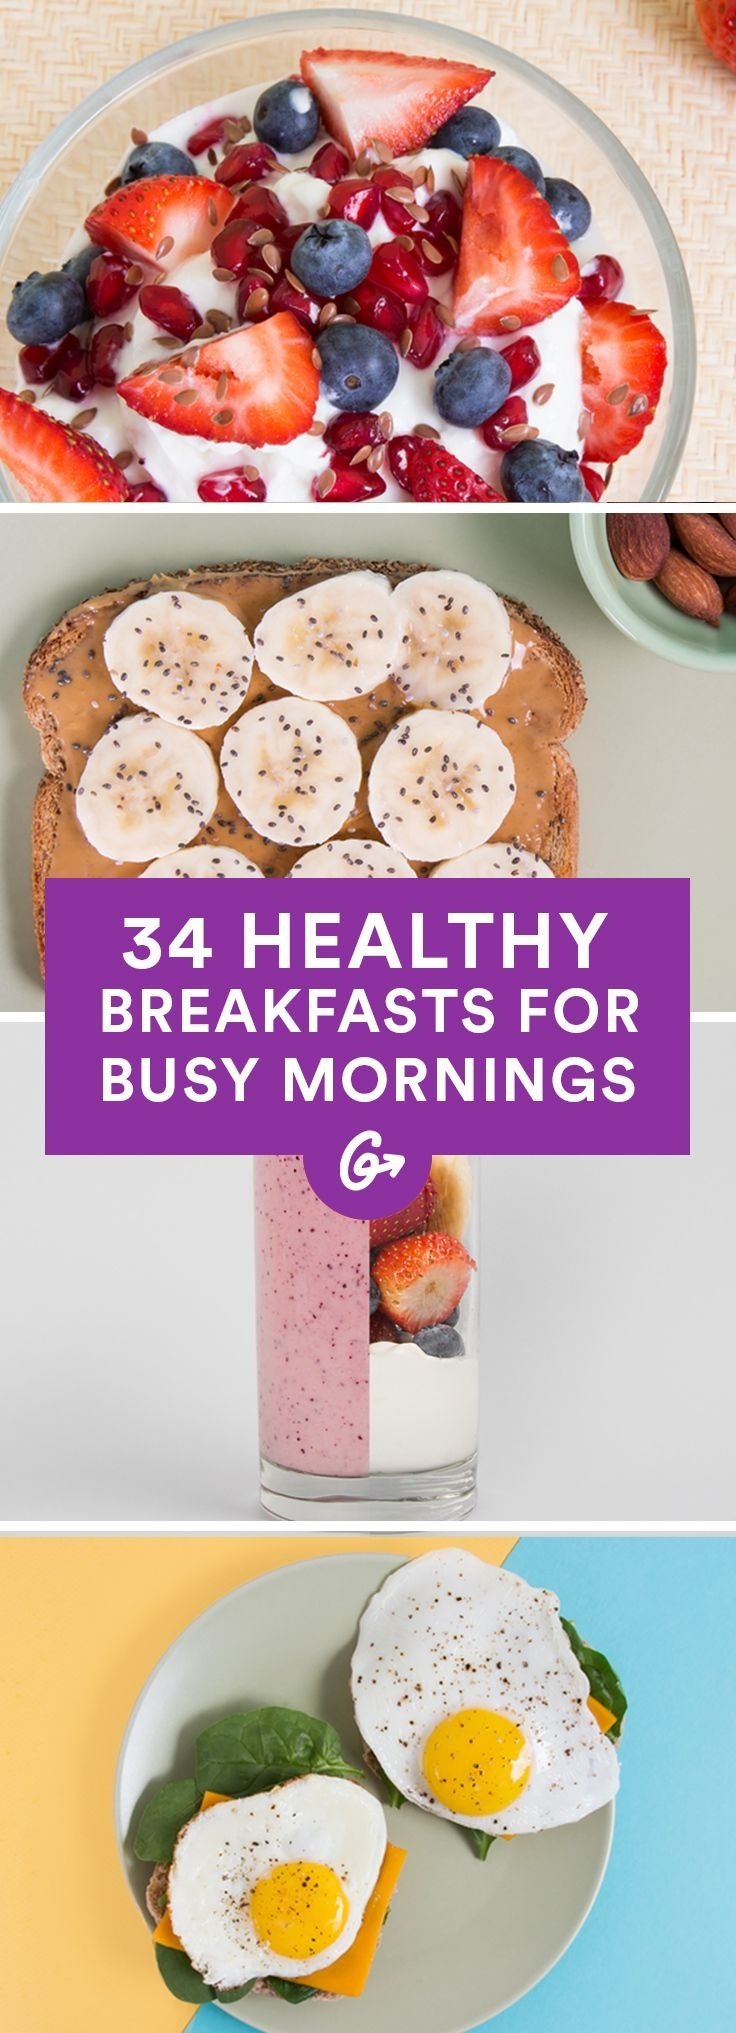 10 Awesome Quick Healthy Breakfast Ideas On The Go 39 healthy breakfasts for busy mornings petit dejeuner recettes 2022